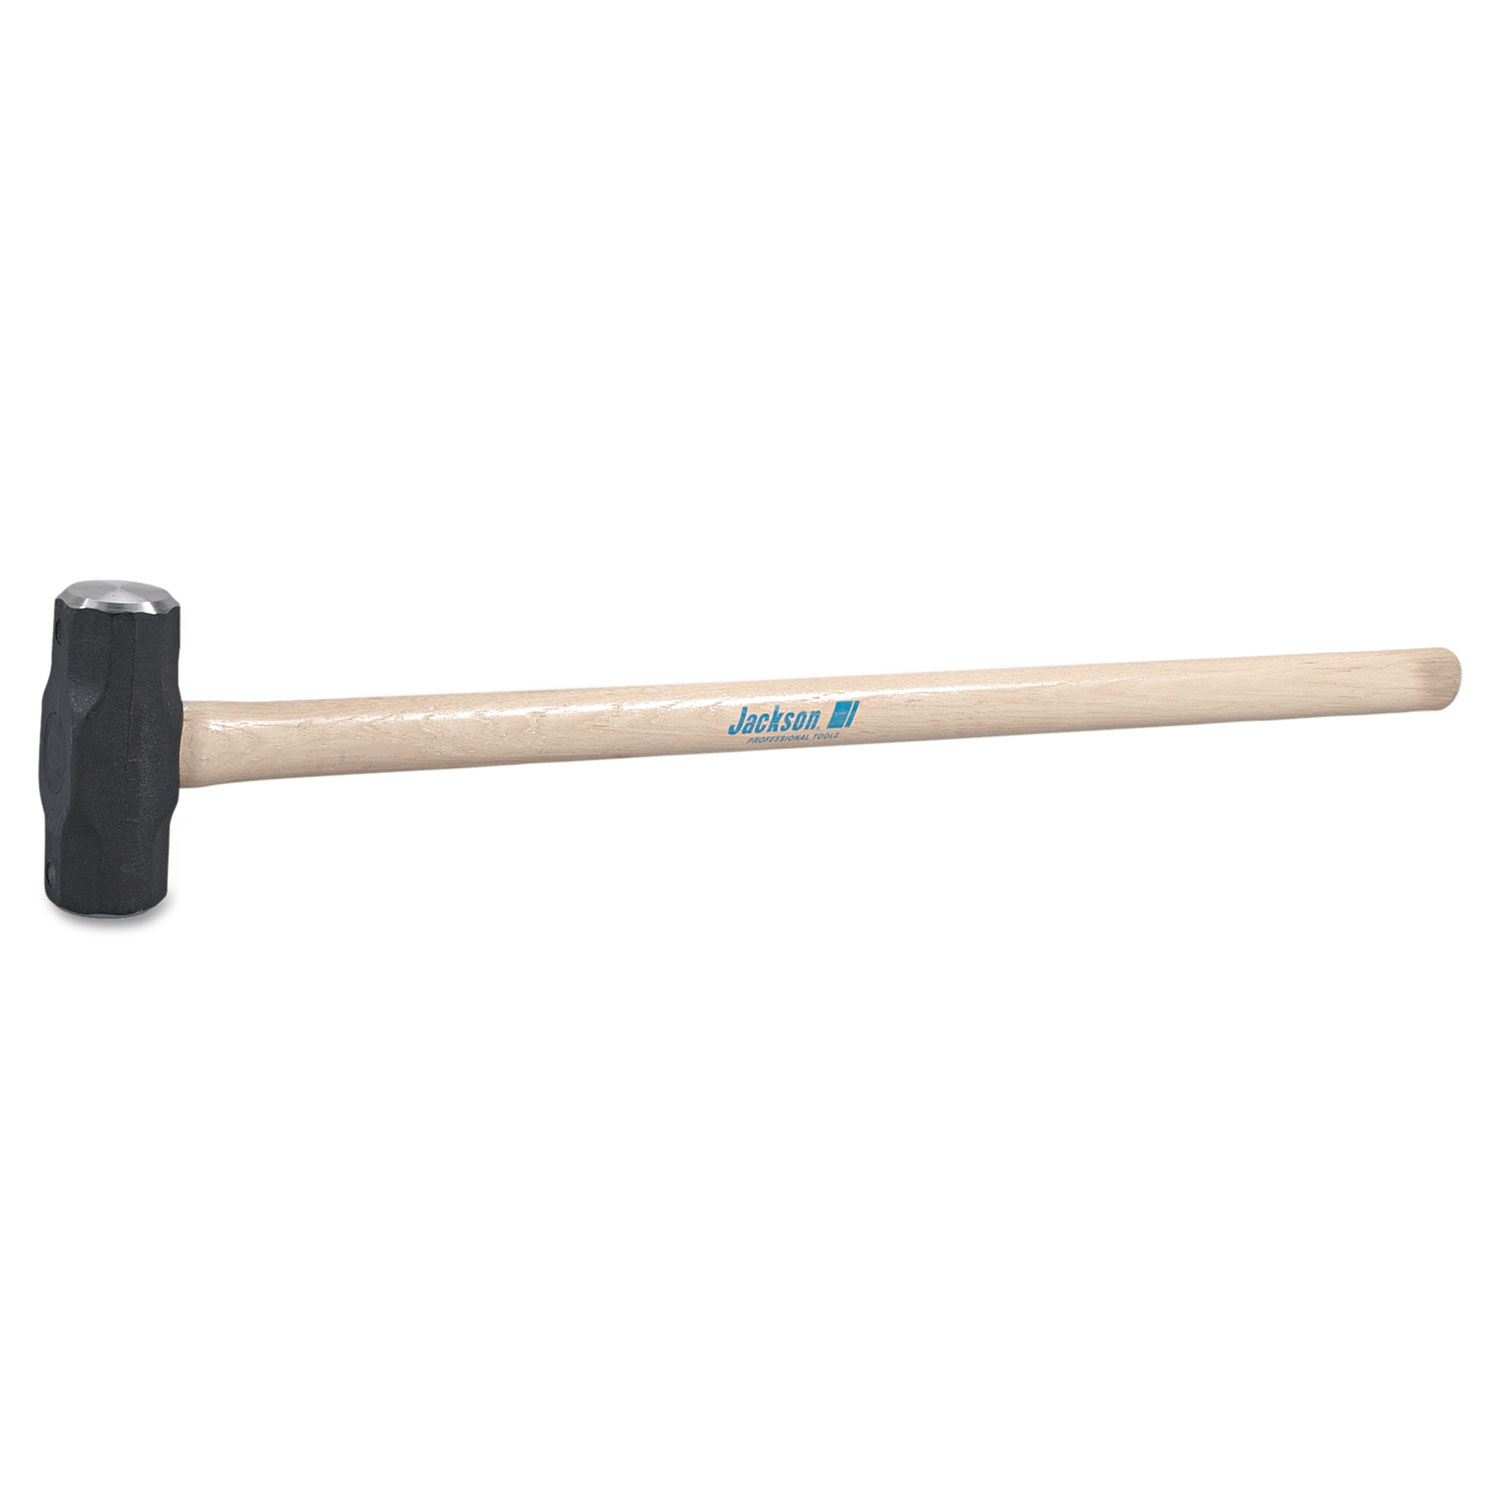 Sledge Hammer, 6lb, 36in Hickory Handle